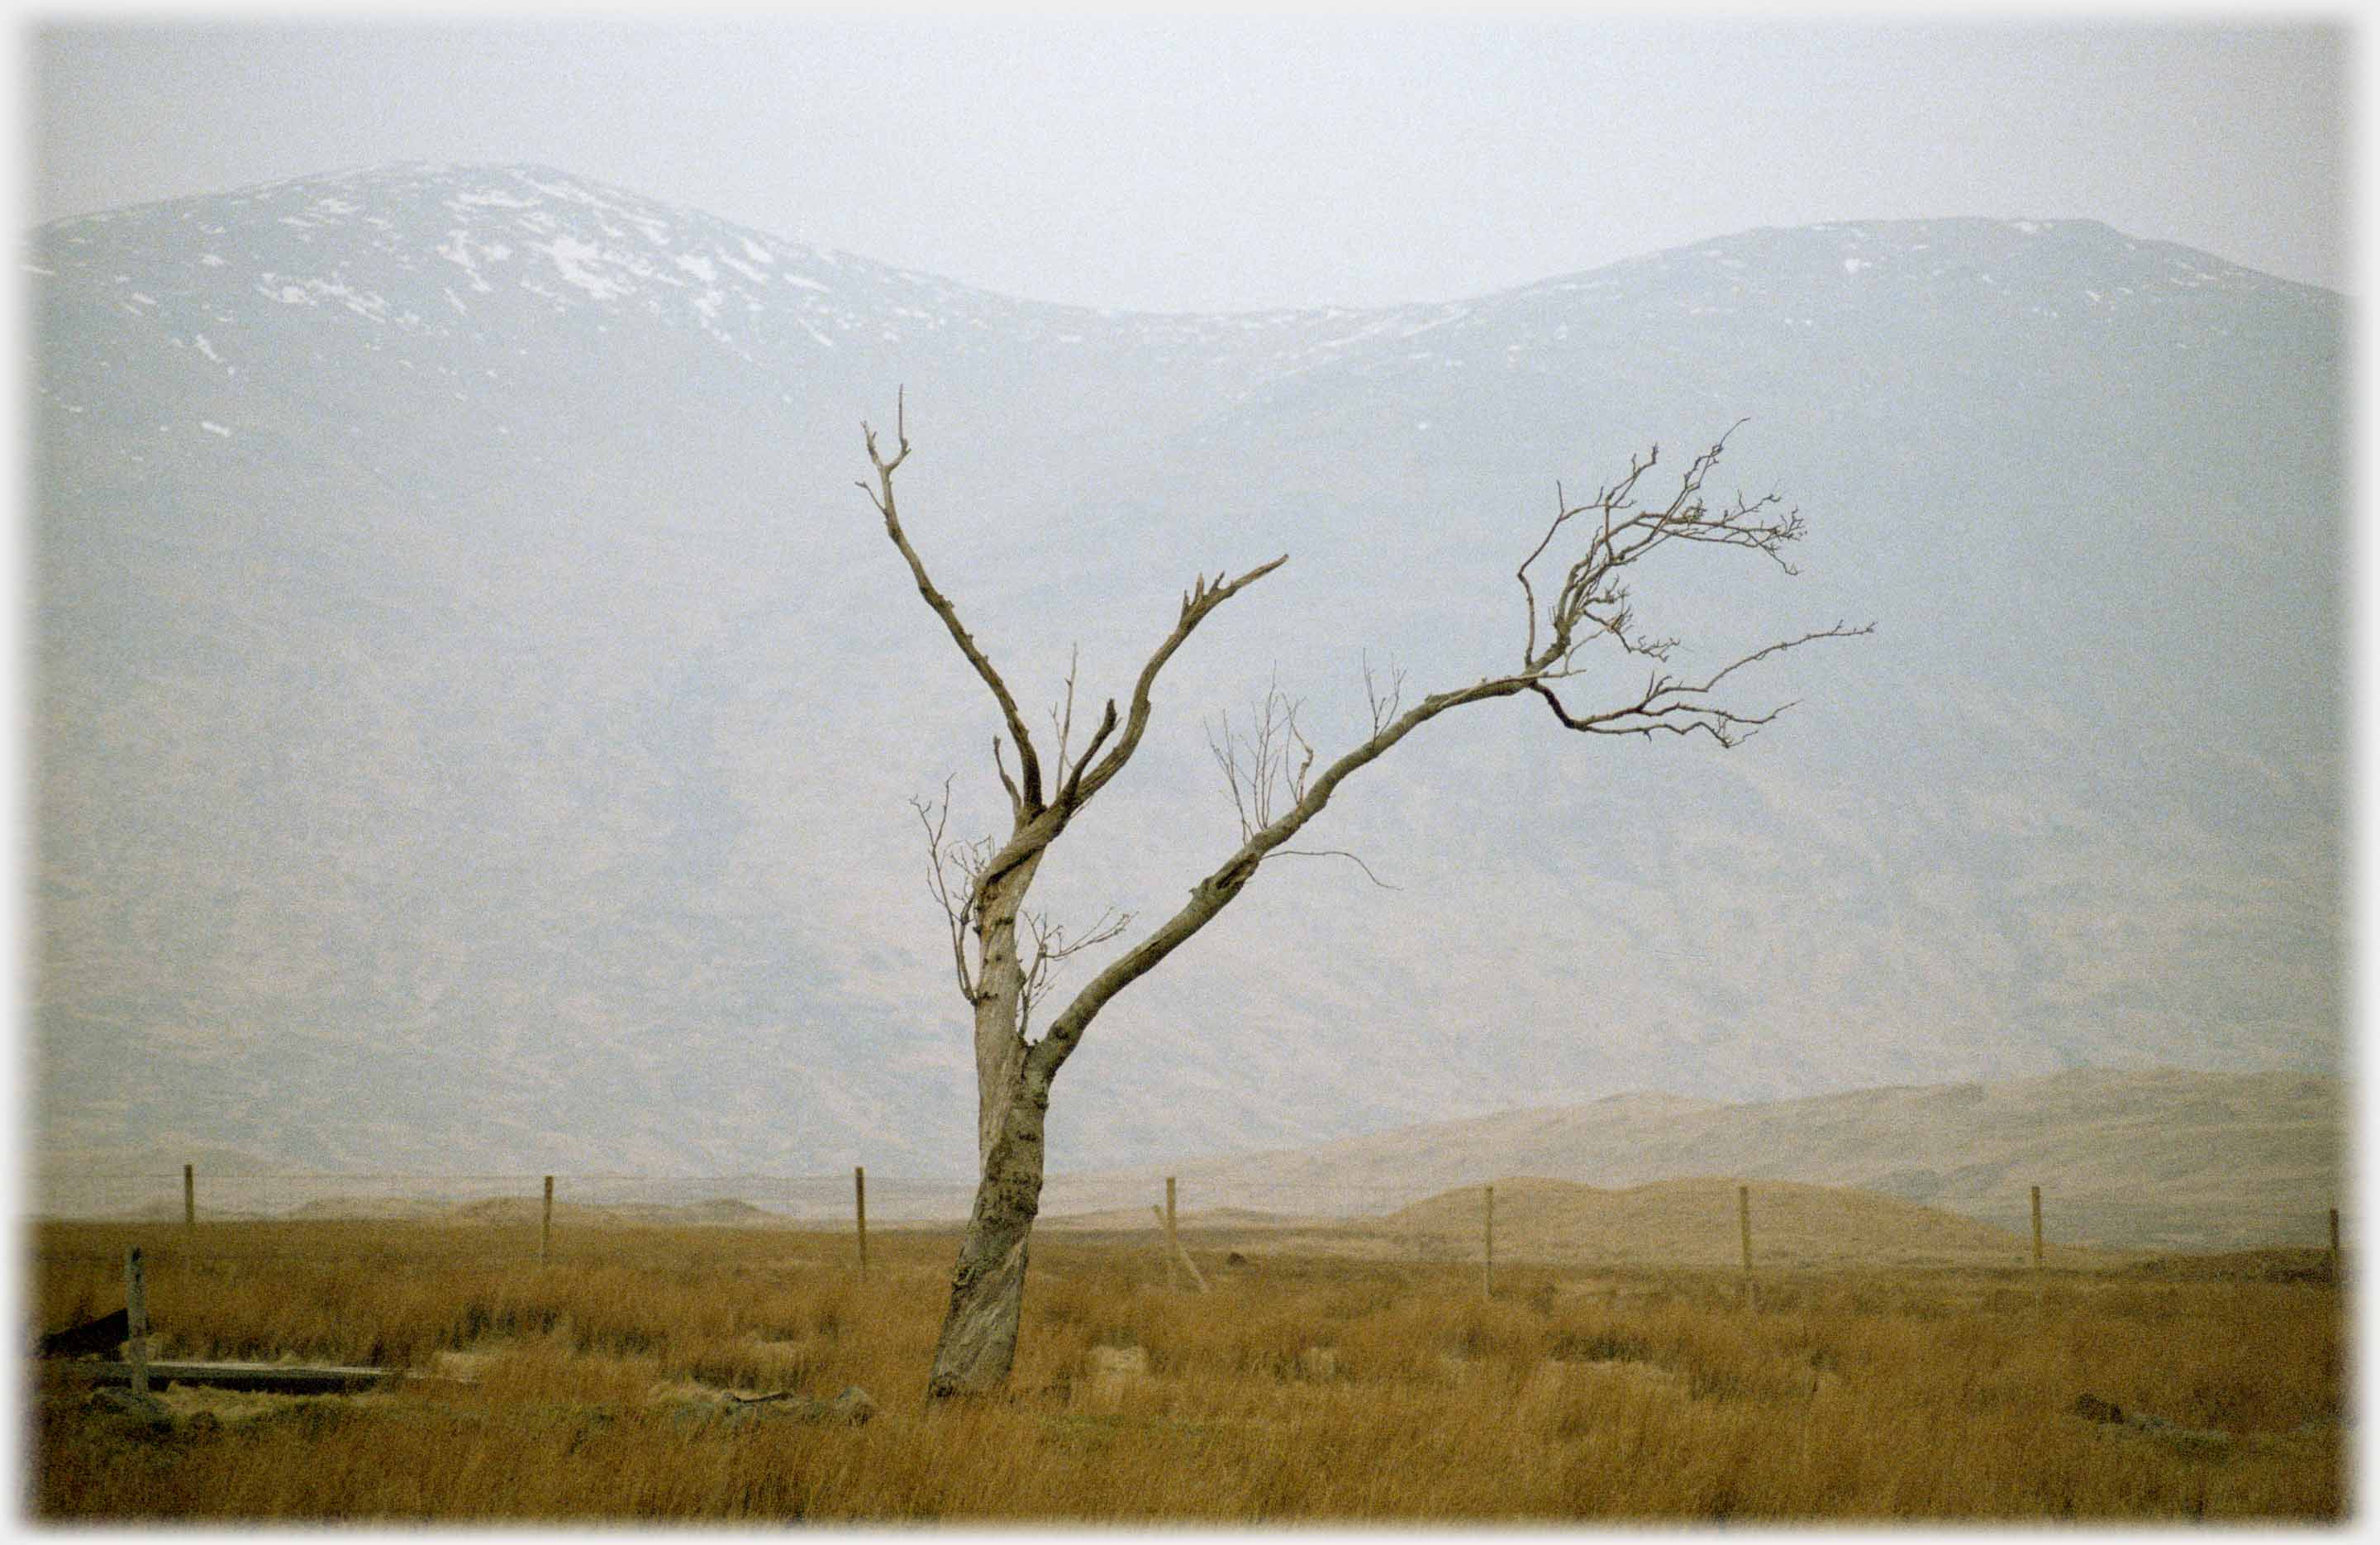 Spindly skeletal tree against mountain.